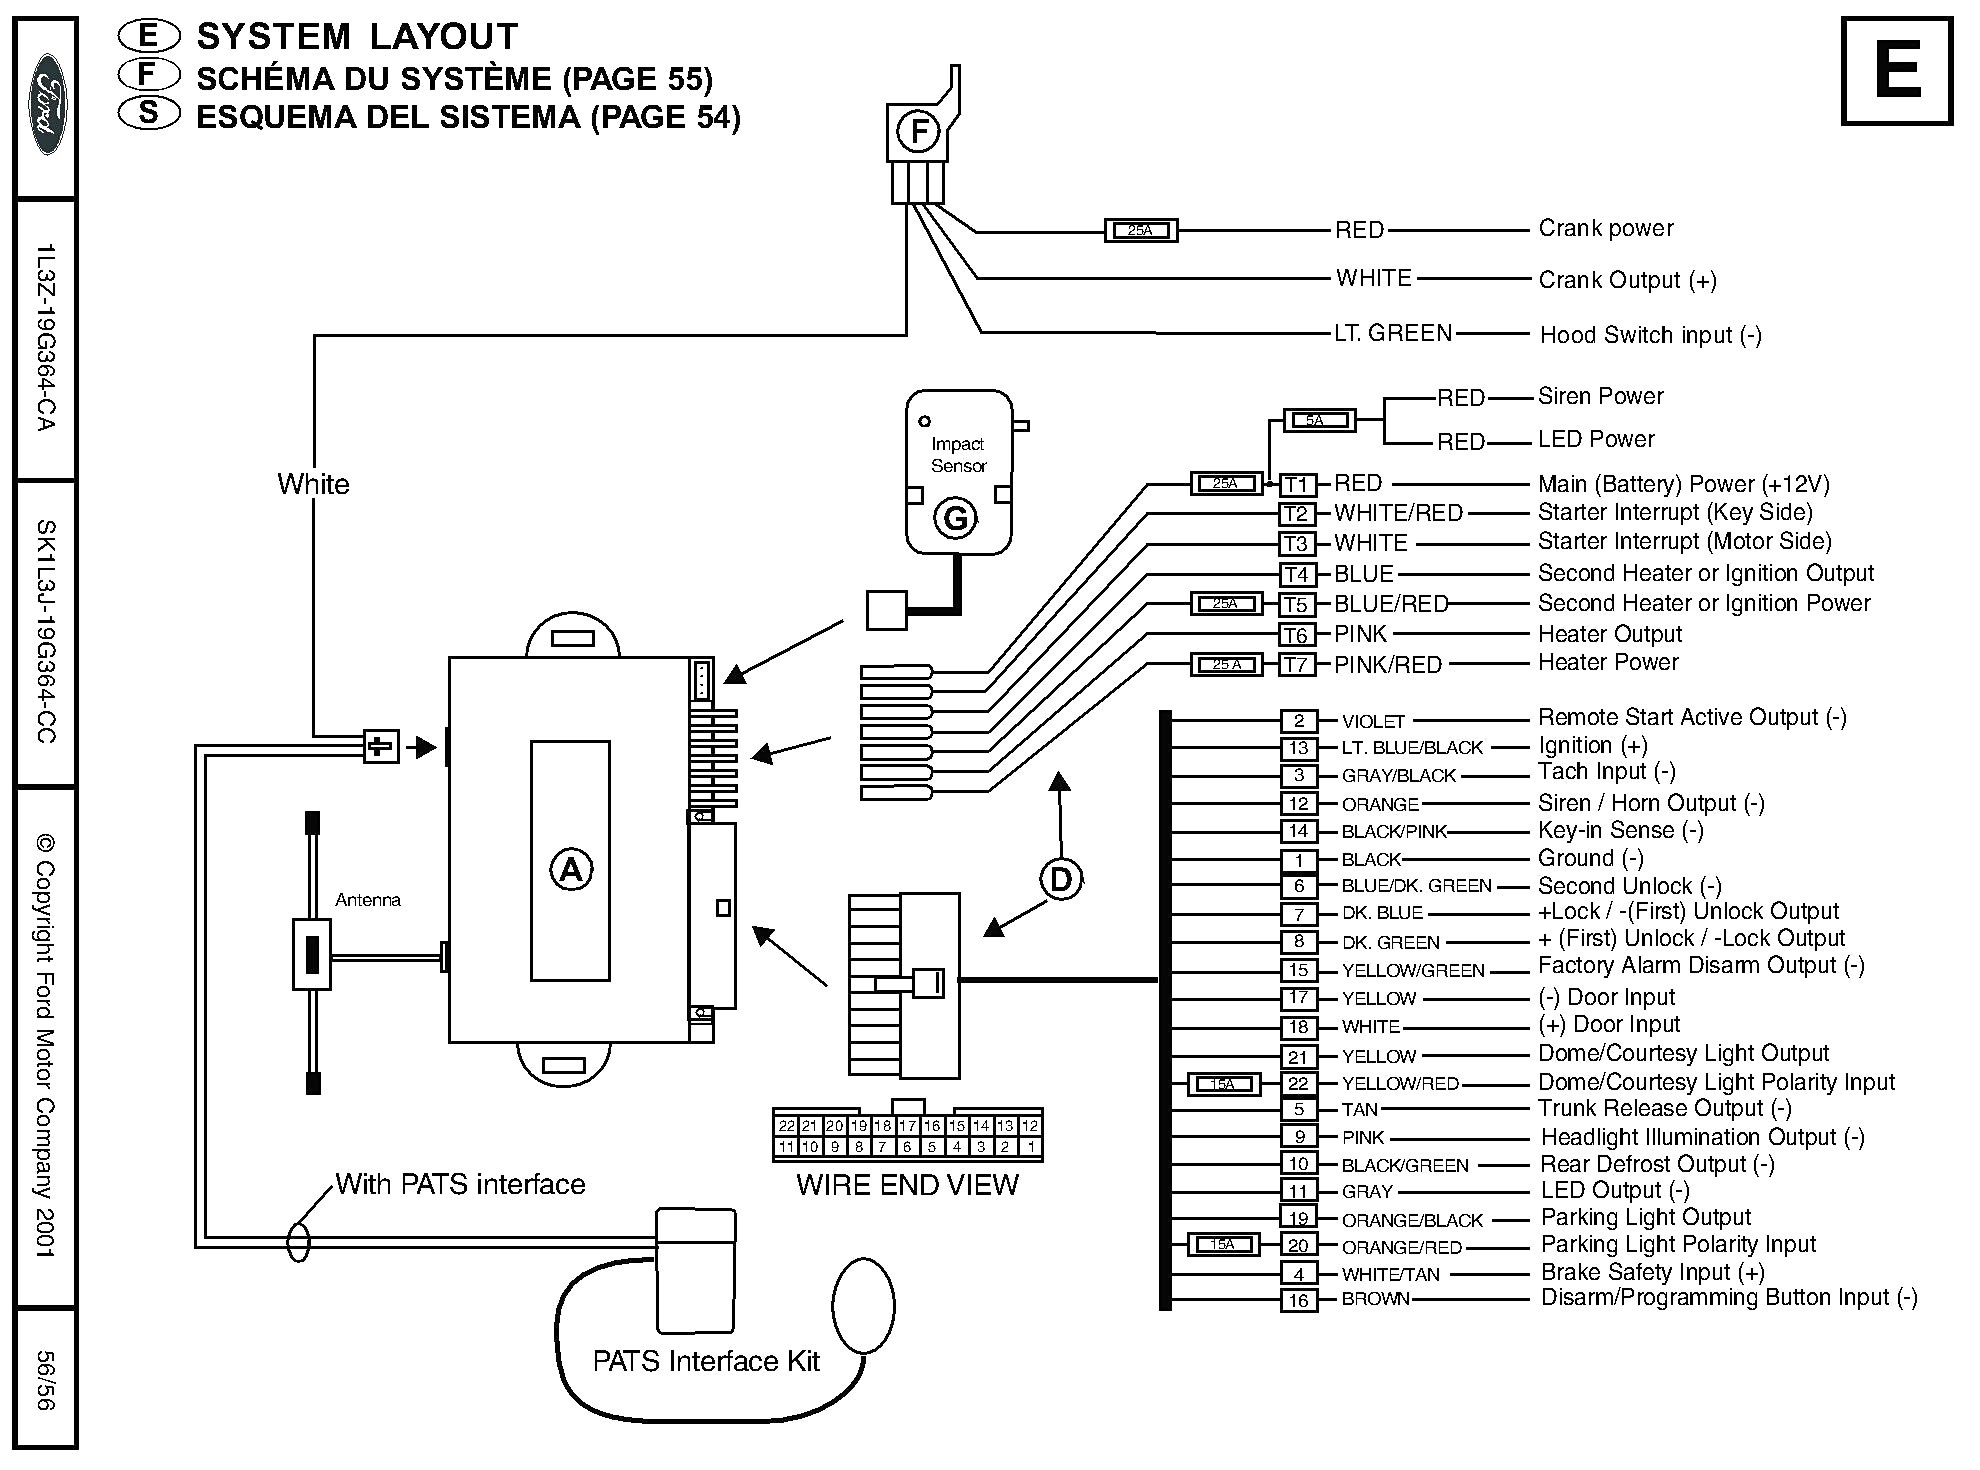 Car Security System Wiring Diagram New Home Security System Wiring Diagram Wiring Diagram